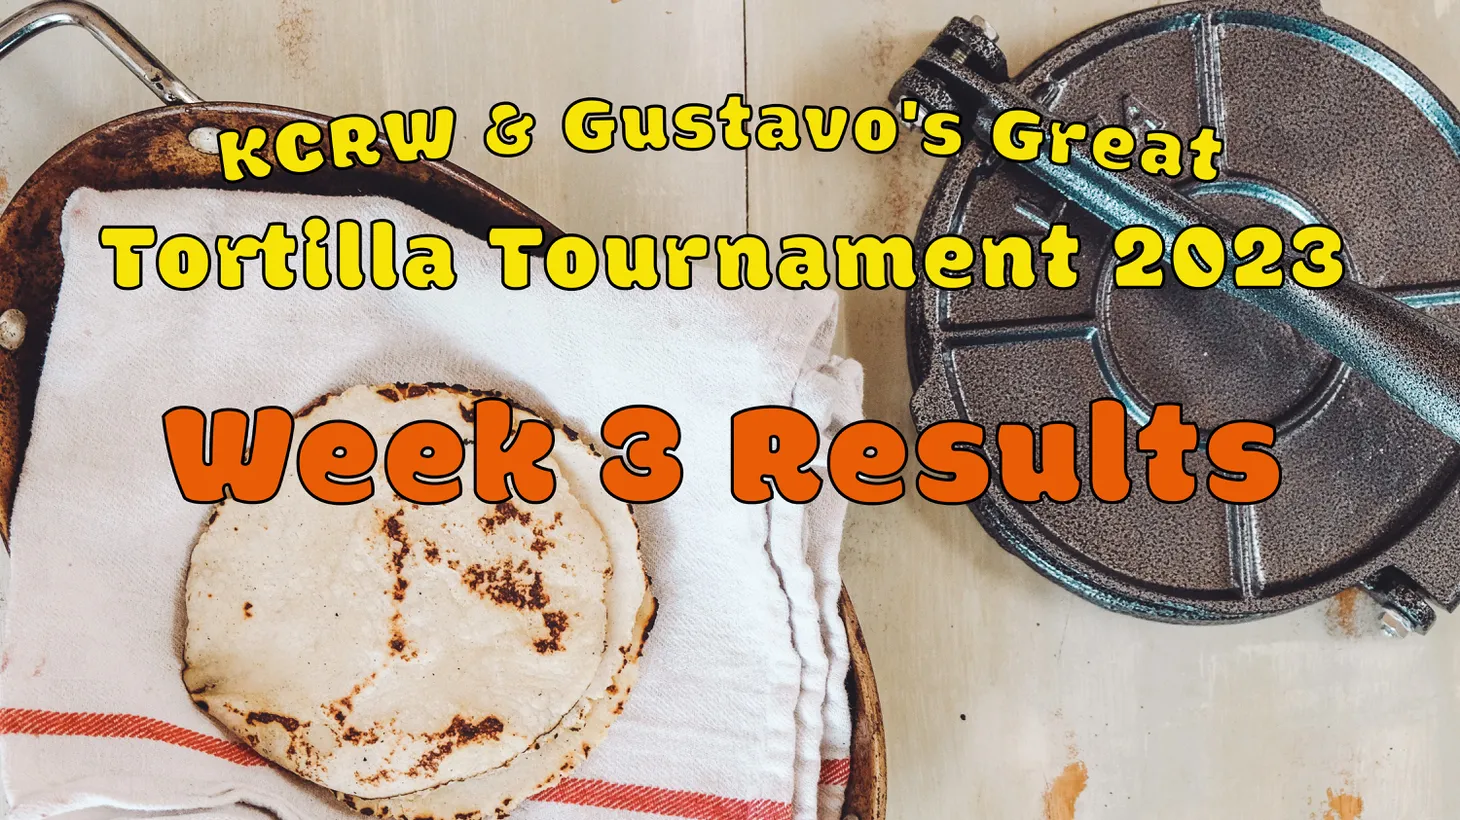 You never know who may win in KCRW and Gustavo's Great Tortilla Tournament!